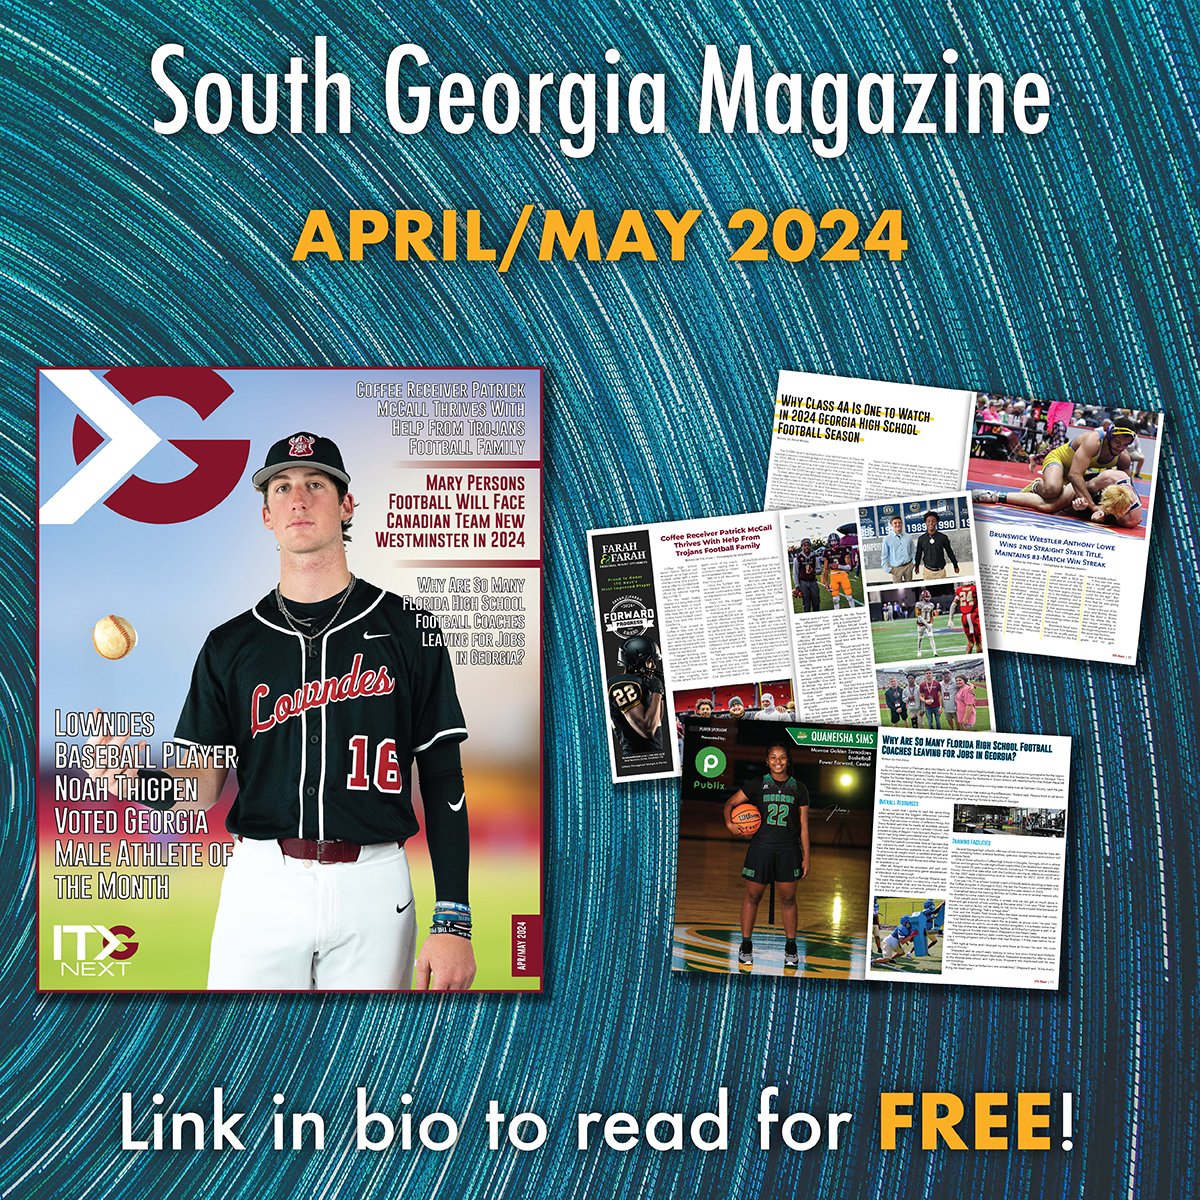 Click below to flip through the pages of the April/May 2024 issue of our South Georgia magazine! ⤵️ itgnext.com/itg-next-south…